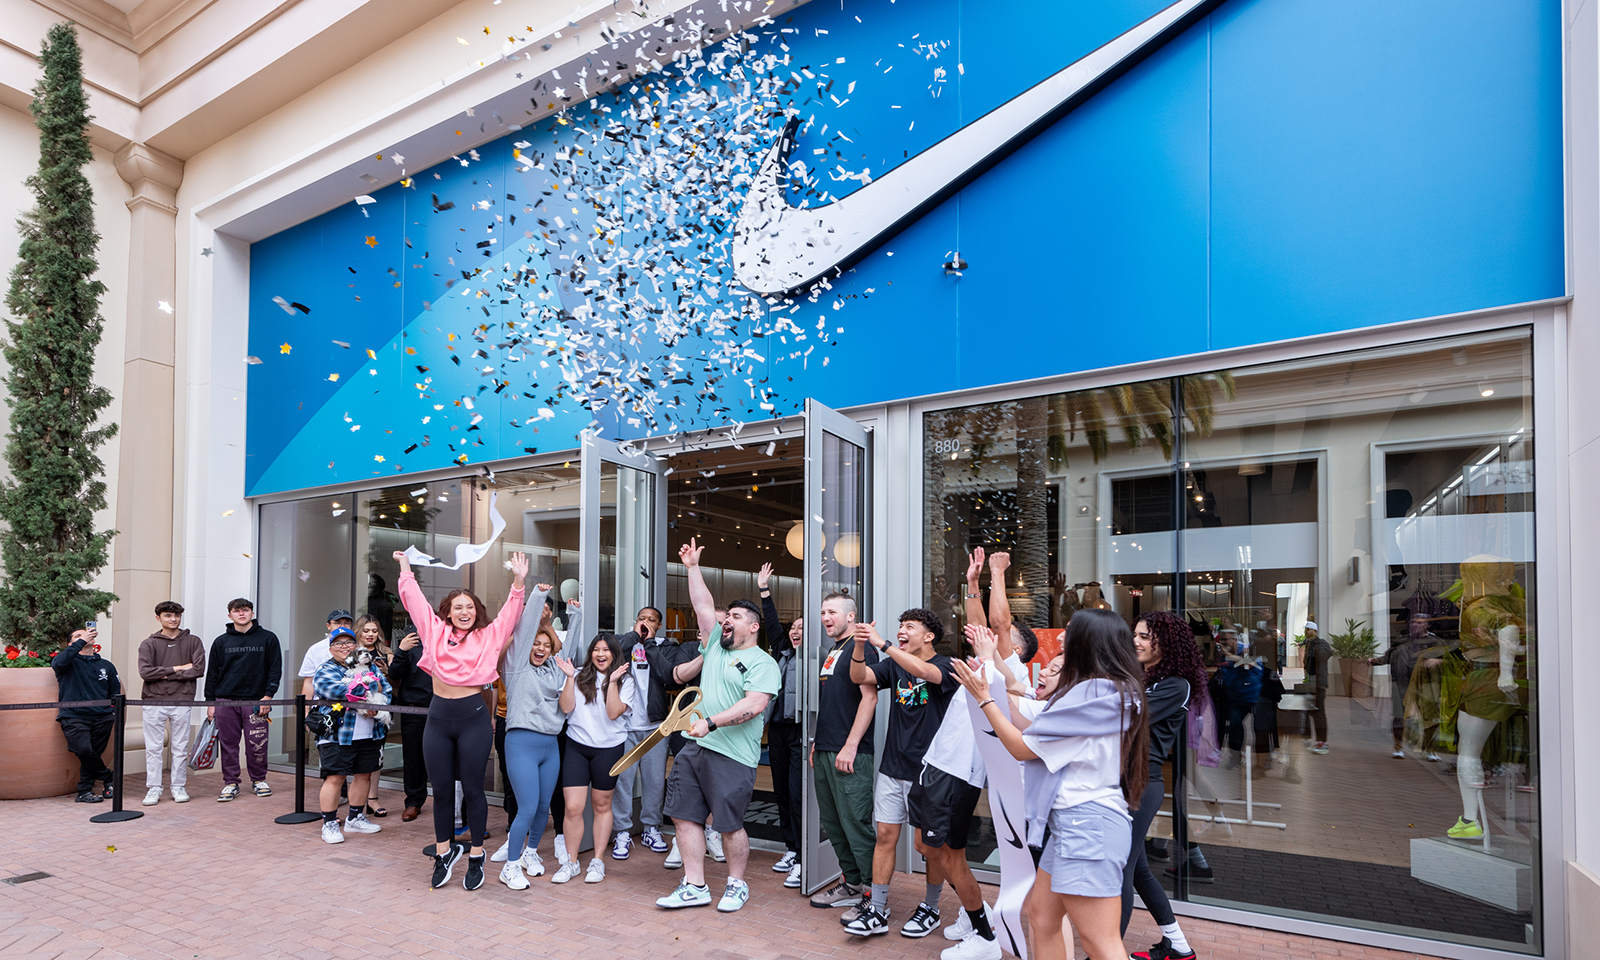 New Nike ventures well beyond sports